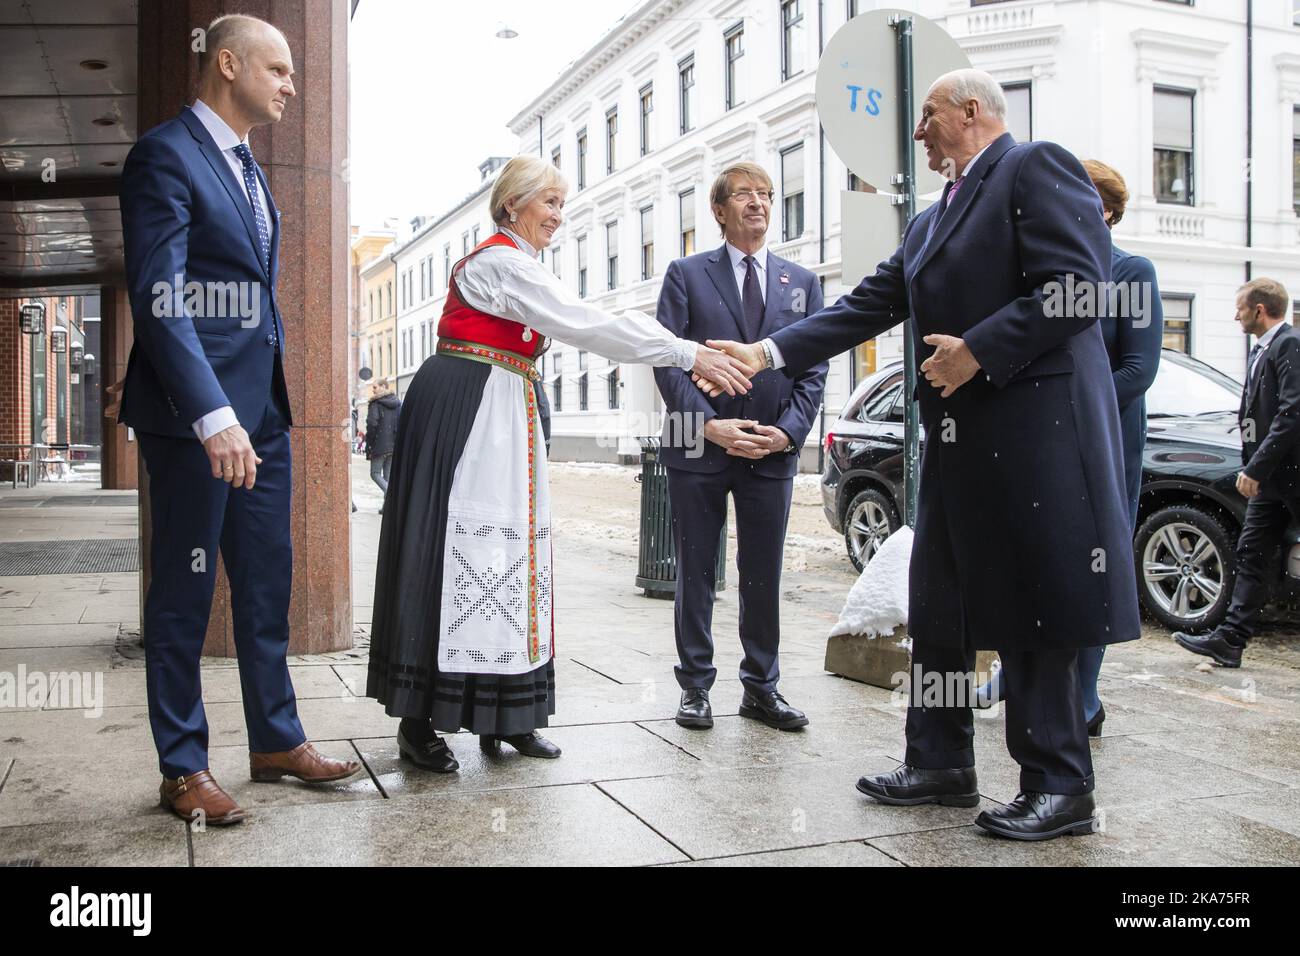 Oslo, Norway 20190205. King Harald is welcomed by from left: Acting general secretary Jon-Richard Haugen, deputy chairman of the board Sidsel B. Skaar and chairman of the board Stein A. Evensen for the award of the National Association of Public Health Heart Research Prize and Dementia Research Prize for 2019 at The Norske Theater in Oslo Tuesday. Photo: Haakon Mosvold Larsen / NTB scanpi Stock Photo